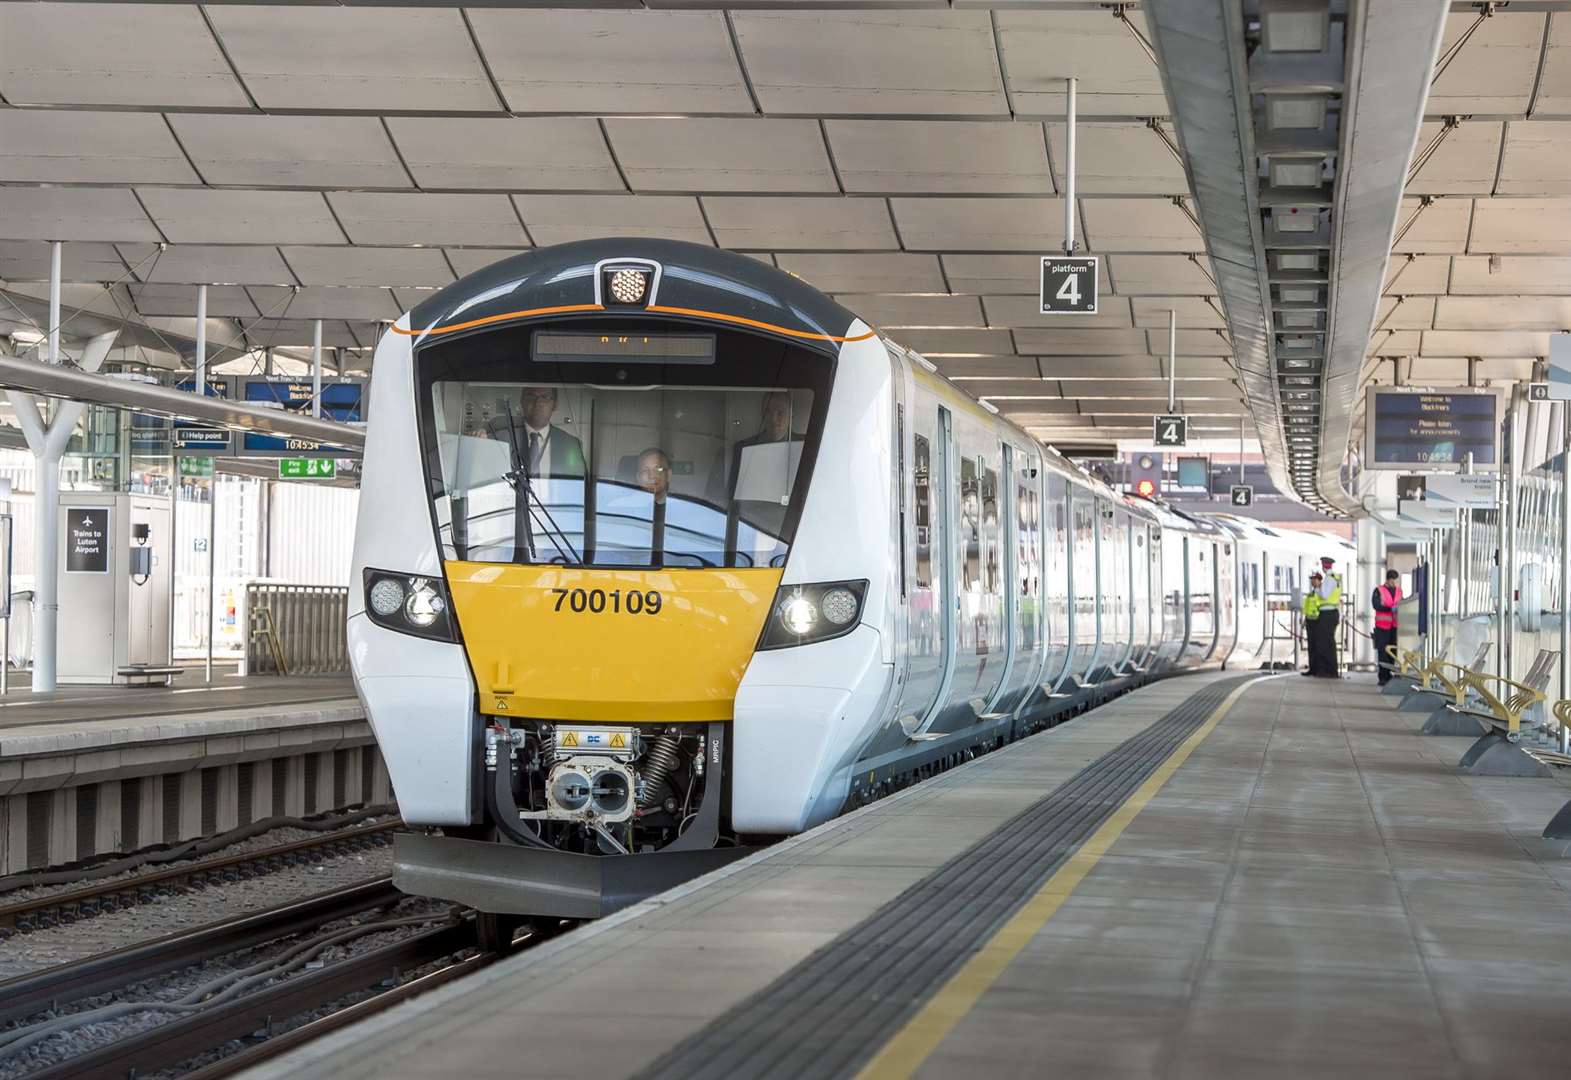 maidstone-to-cambridge-train-line-hopes-revived-as-kent-county-council